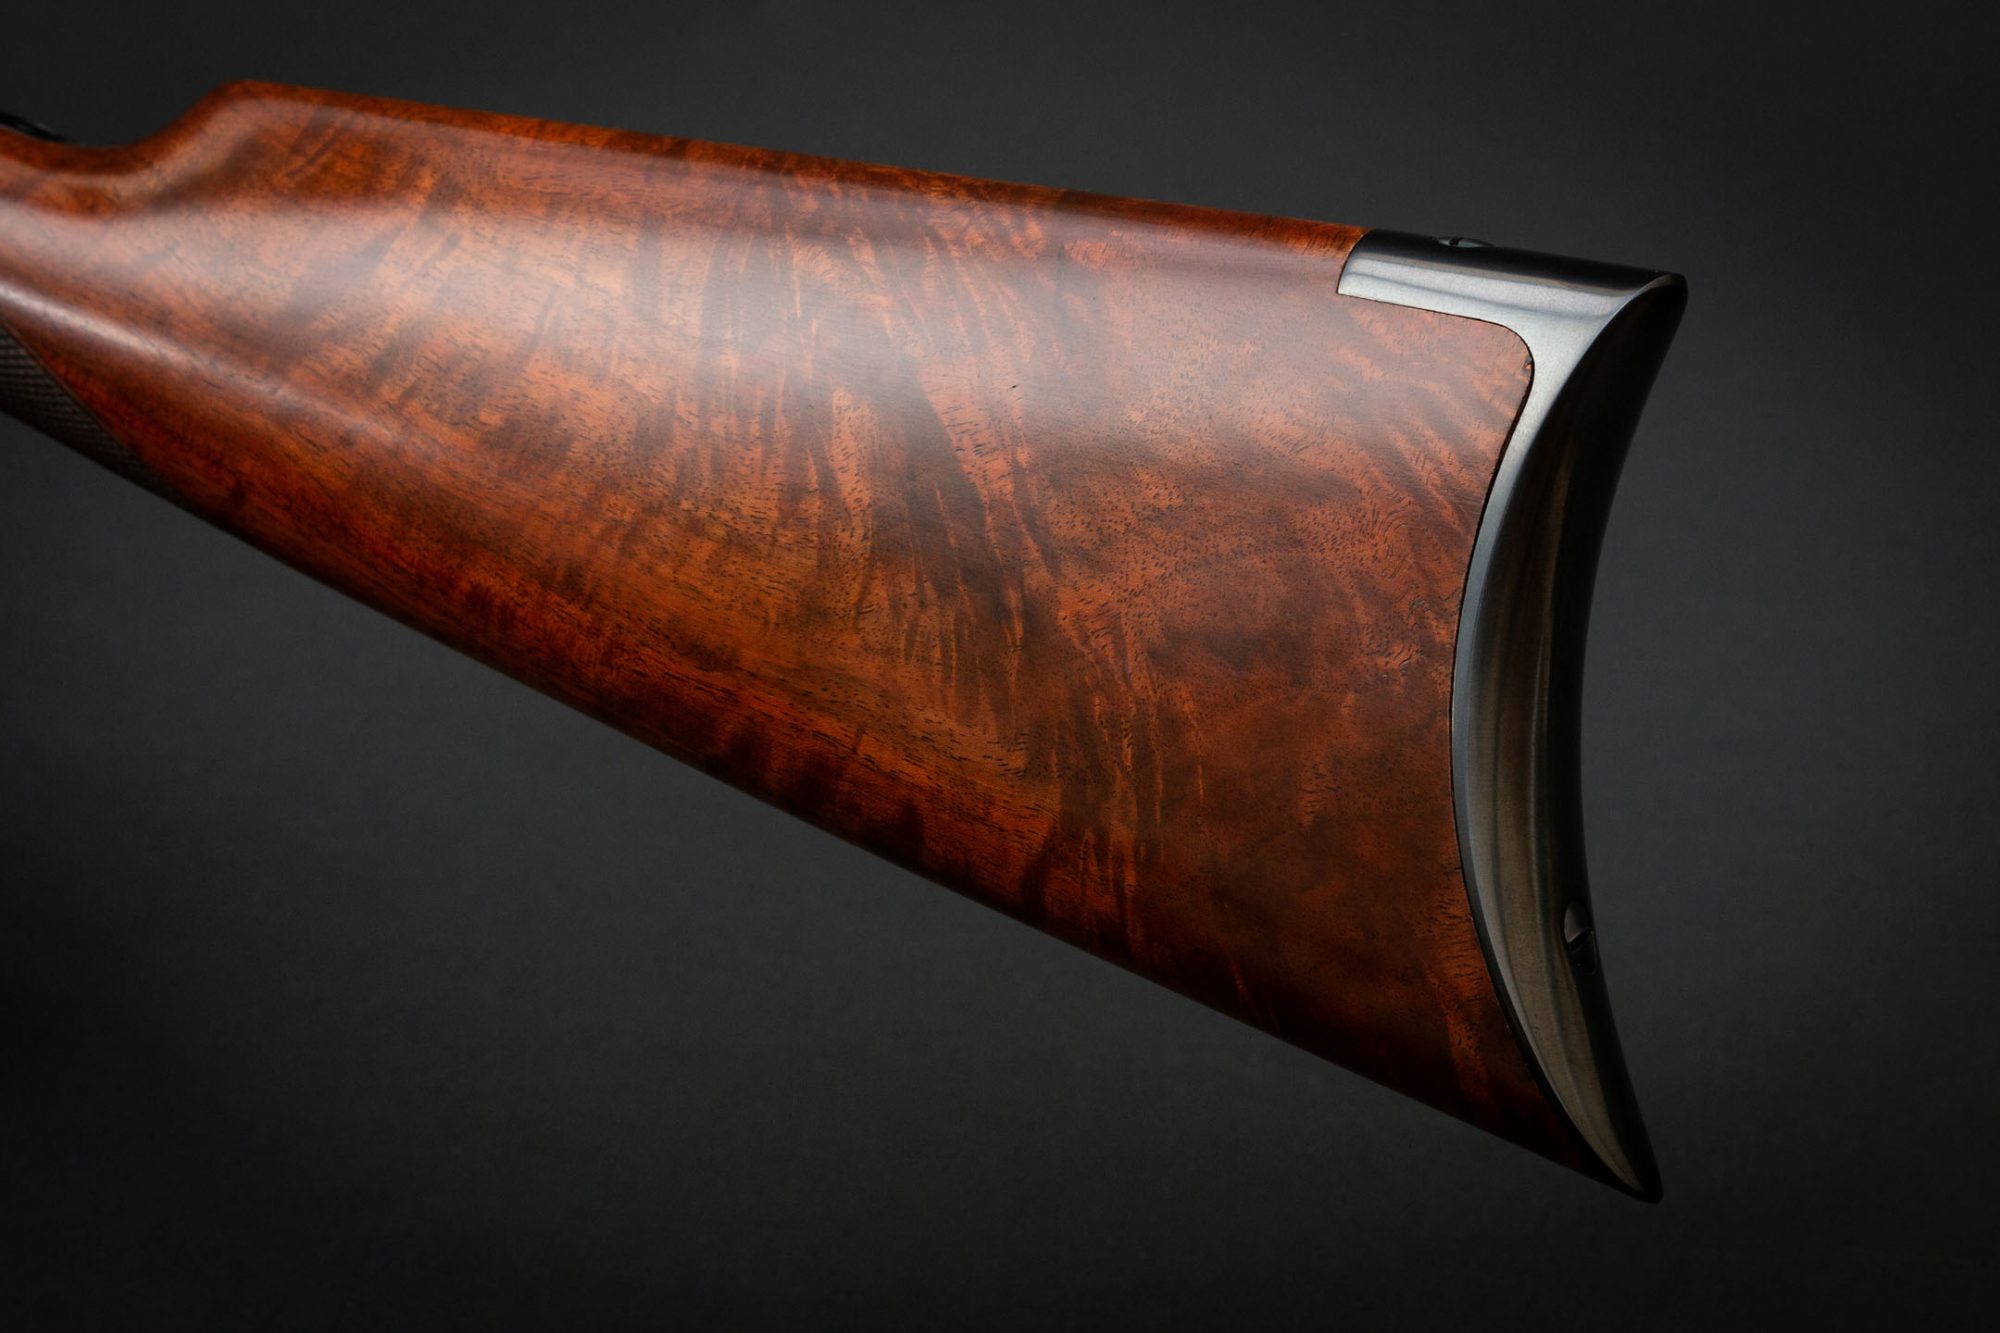 Winchester Model 1890 in .22 Short, restored by Turnbull Restoration Co. and now offered for sale